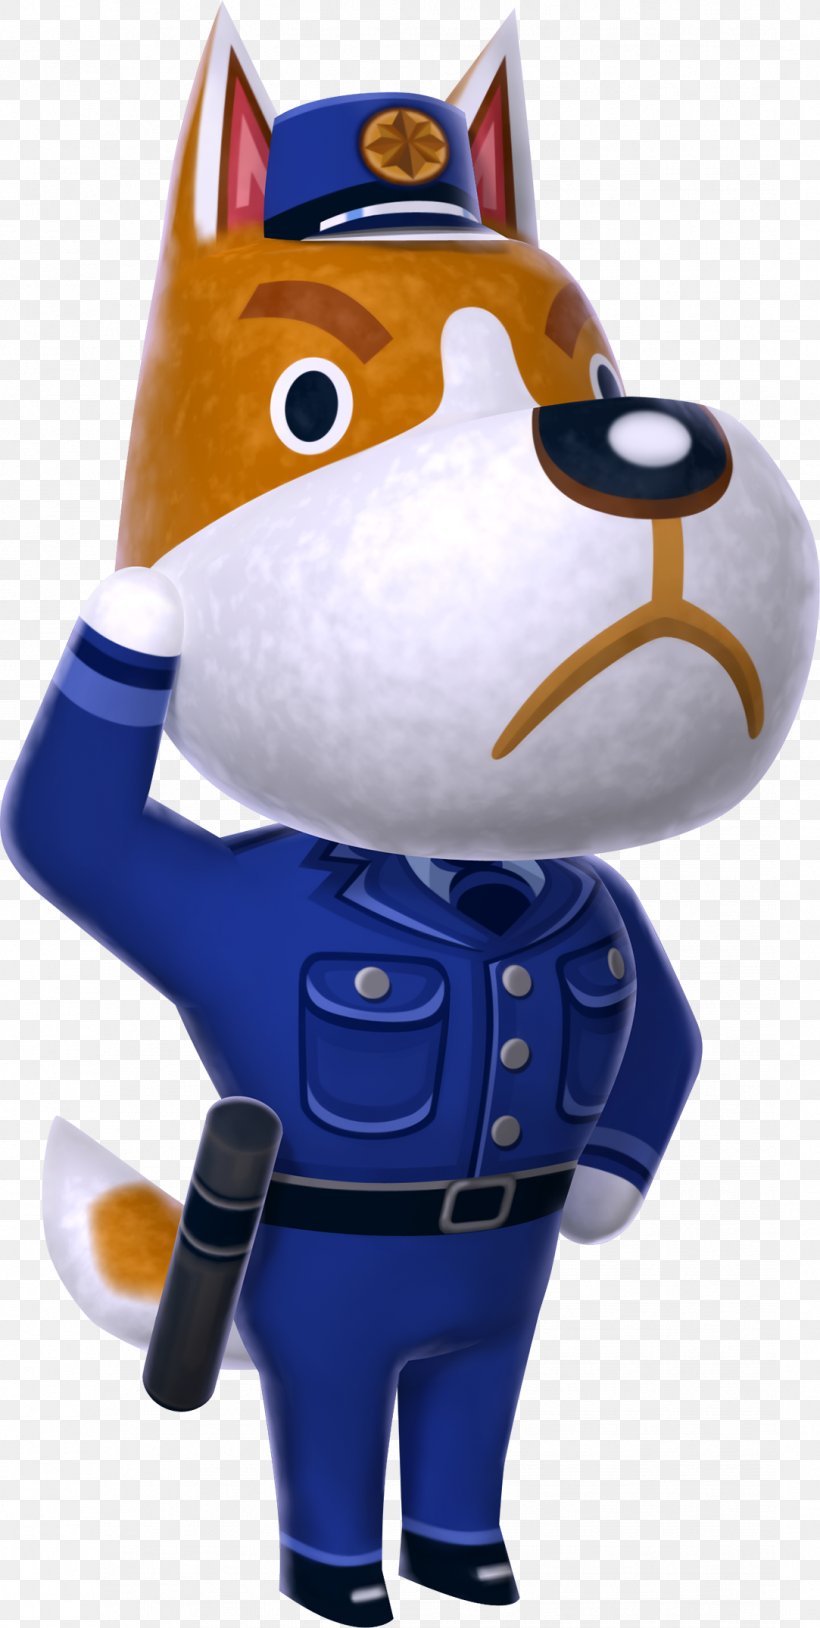 Animal Crossing: New Leaf Mr. Resetti Wii Police Officer, PNG, 1083x2151px, Animal Crossing New Leaf, Animal Crossing, Electric Blue, Game, Life Simulation Game Download Free